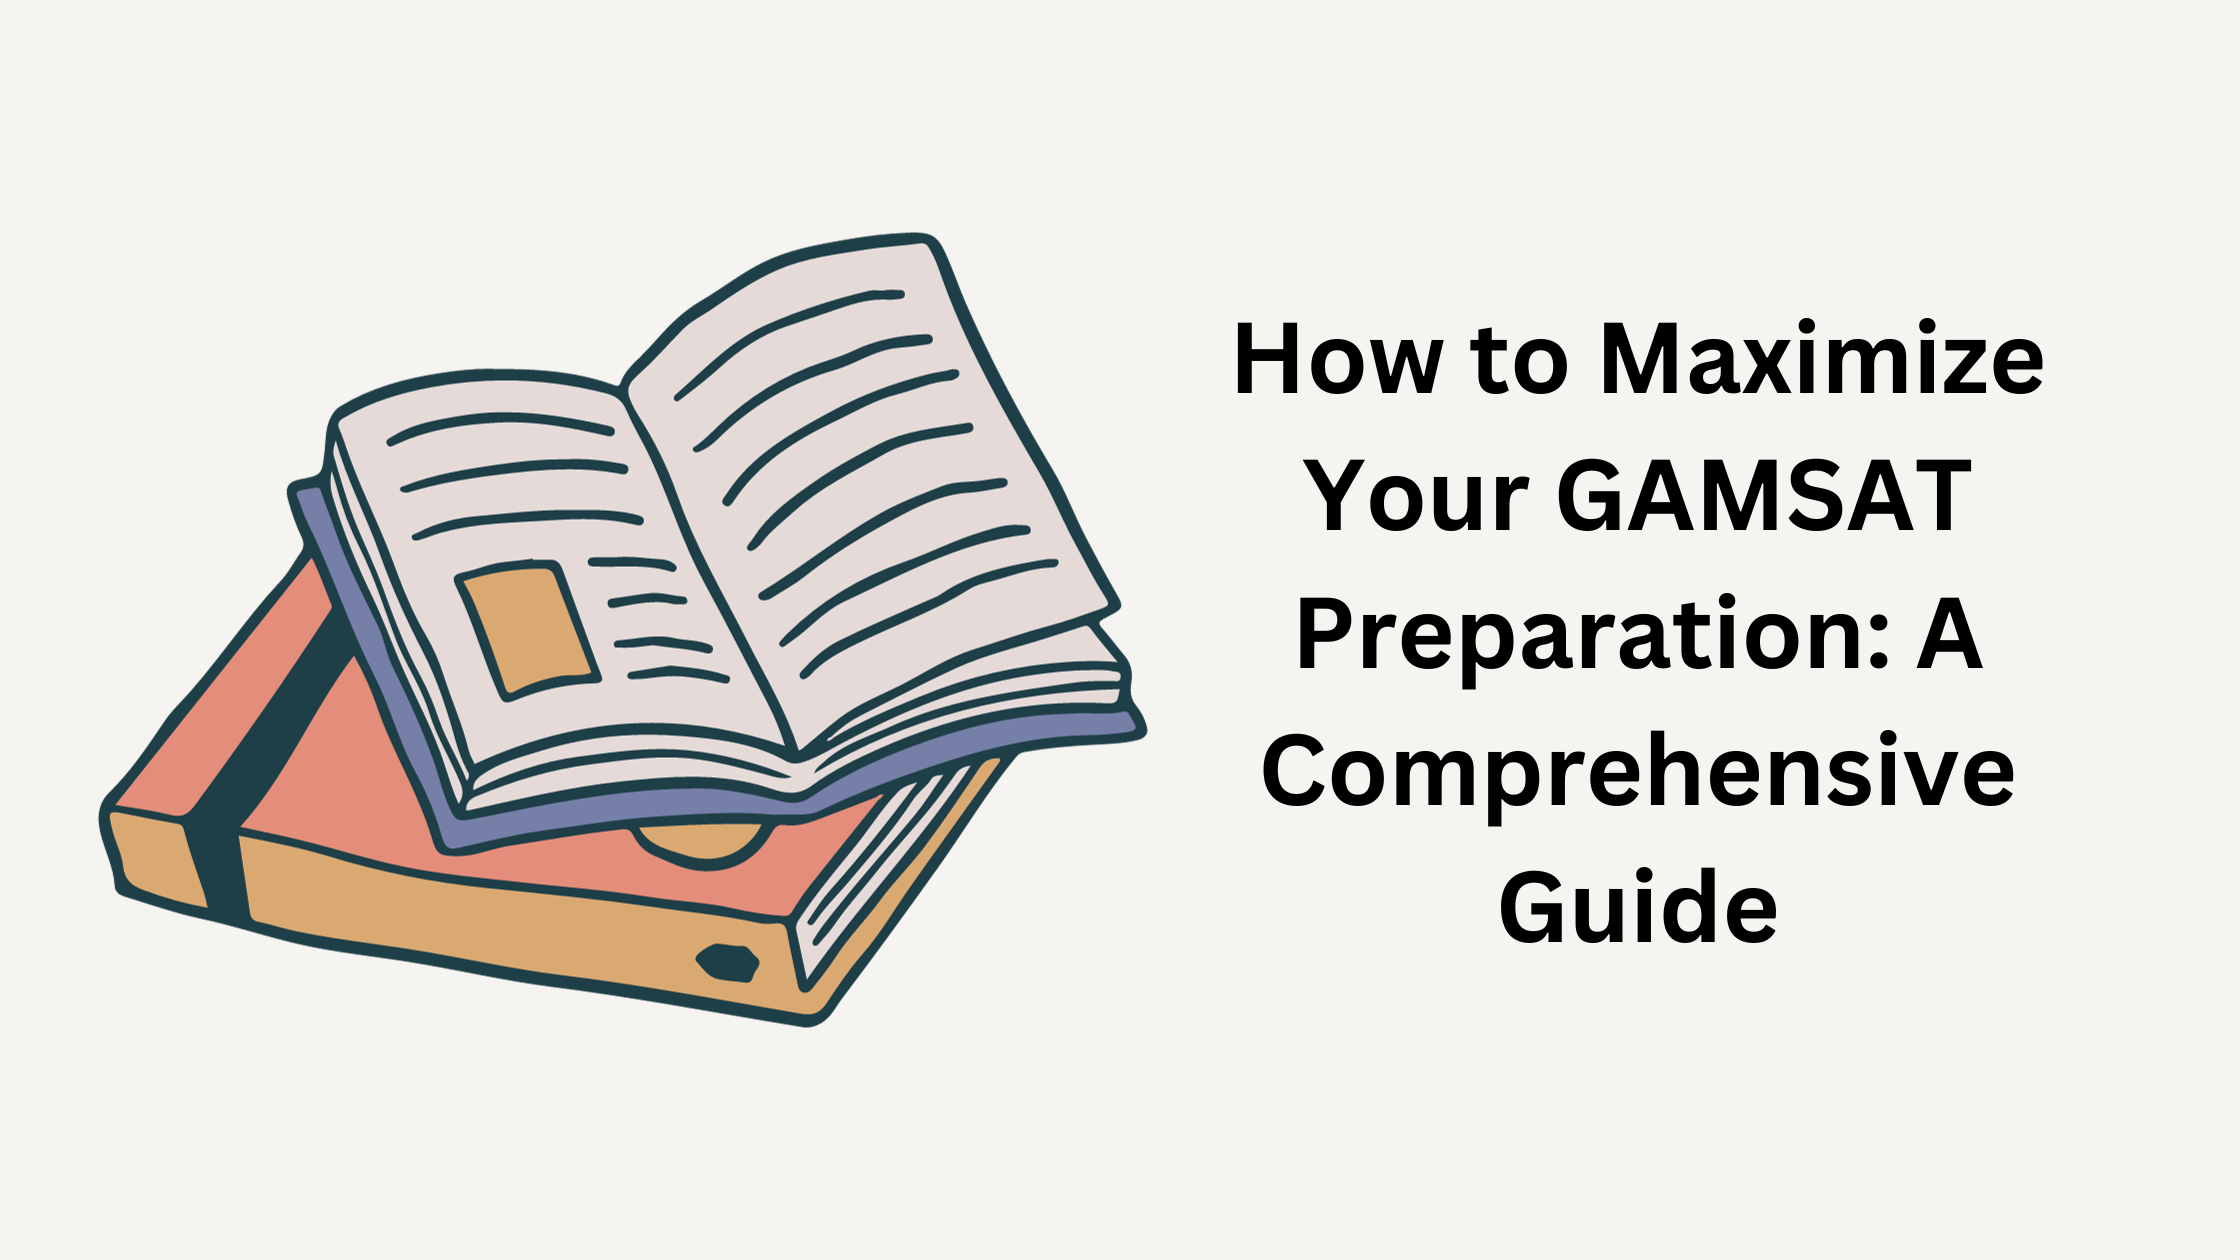 How to Maximize Your GAMSAT Preparation: A Comprehensive Guide